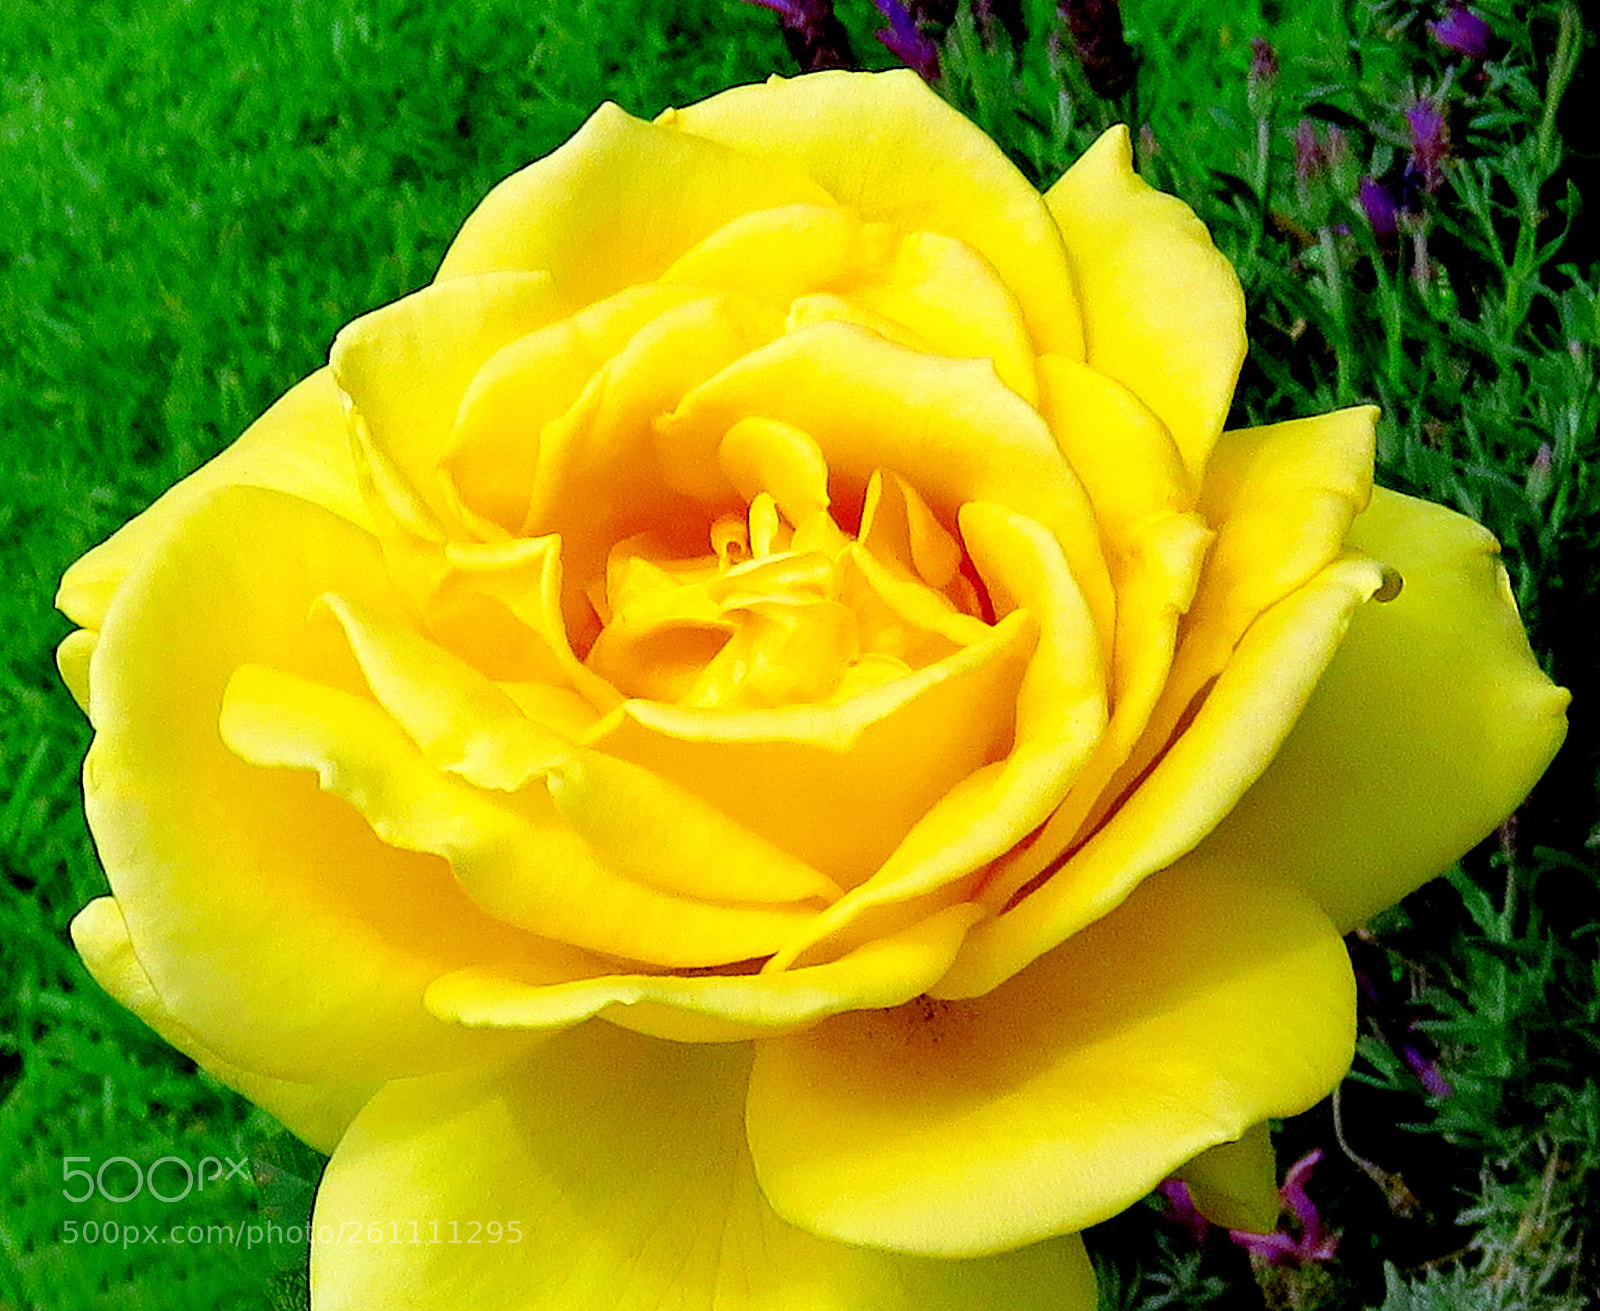 Canon PowerShot SX60 HS sample photo. A yellow rose flower photography